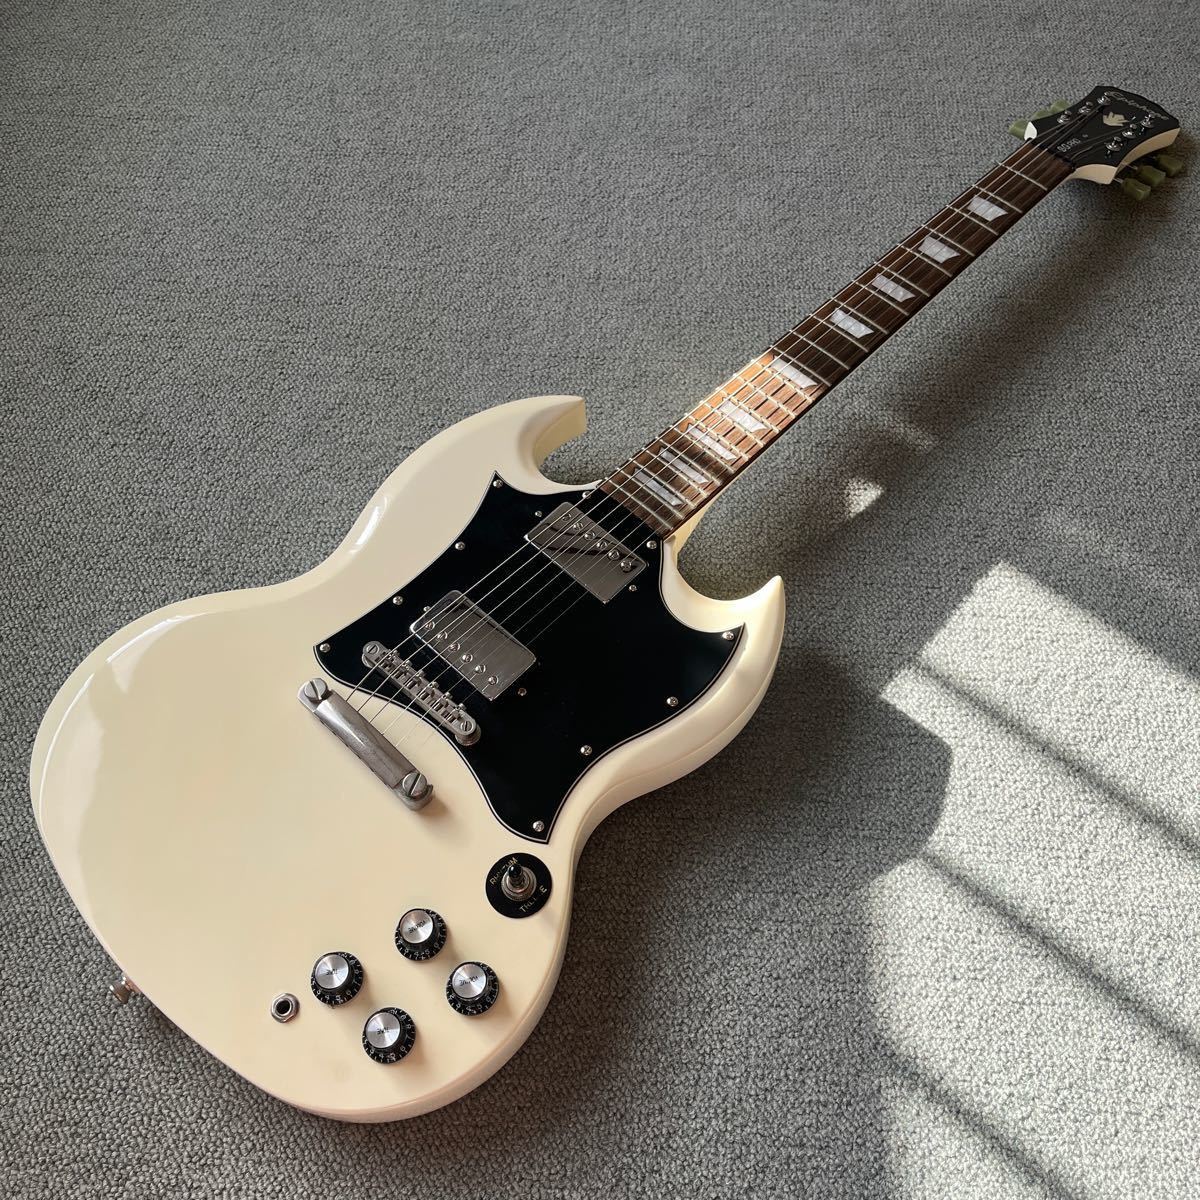 Epiphone by Gibson SG standard WH エピフォン　ギブソン ジャンク扱い　エレキギター _画像9